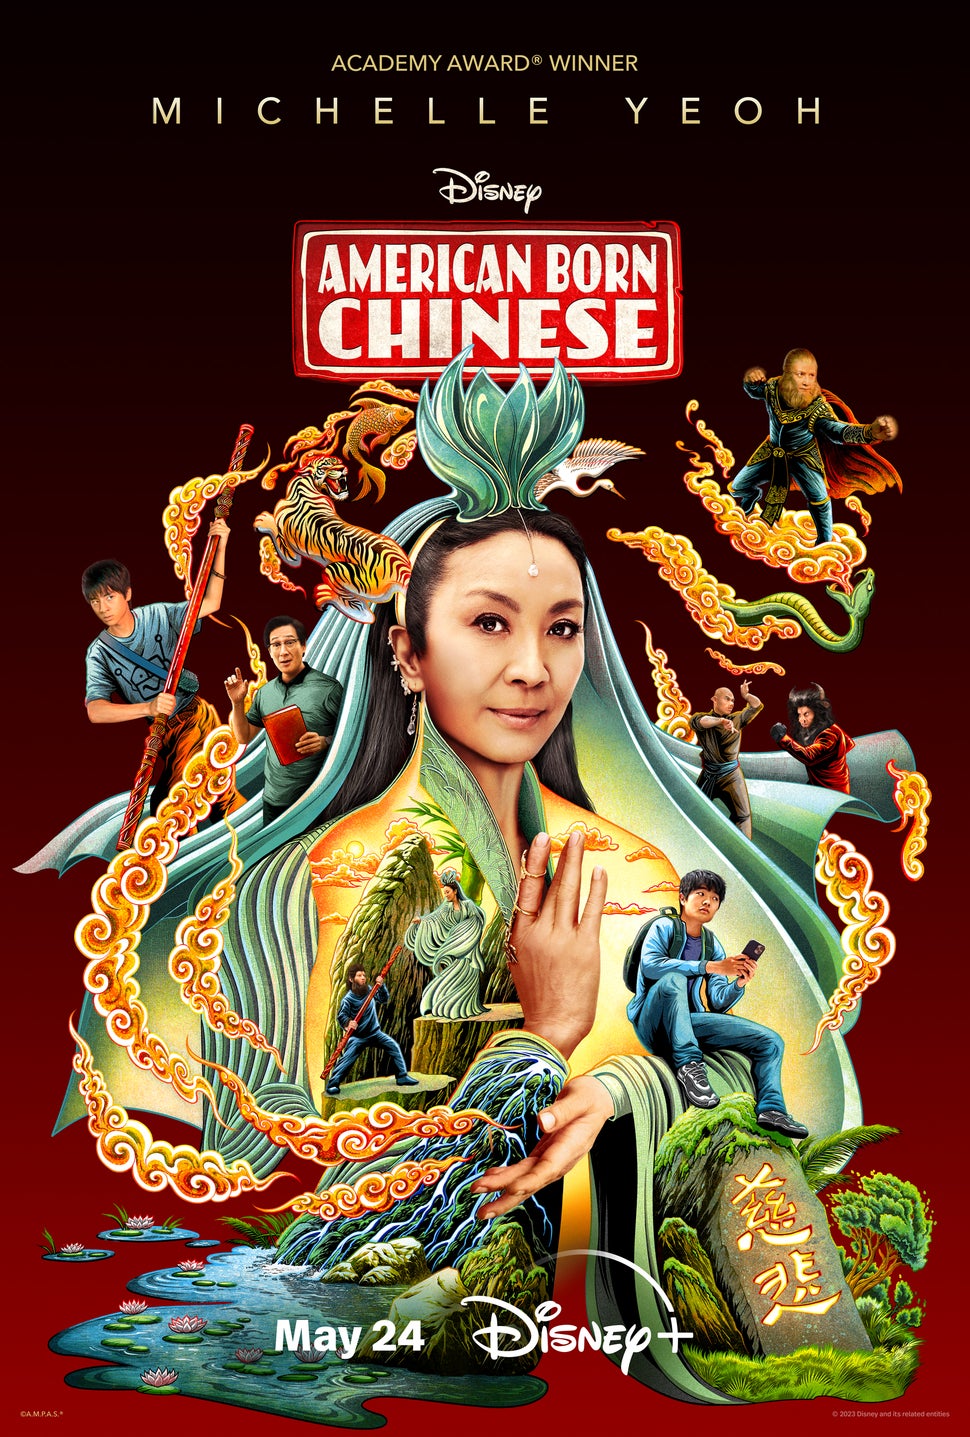 American Born Chinese Poster - Michelle Yeoh